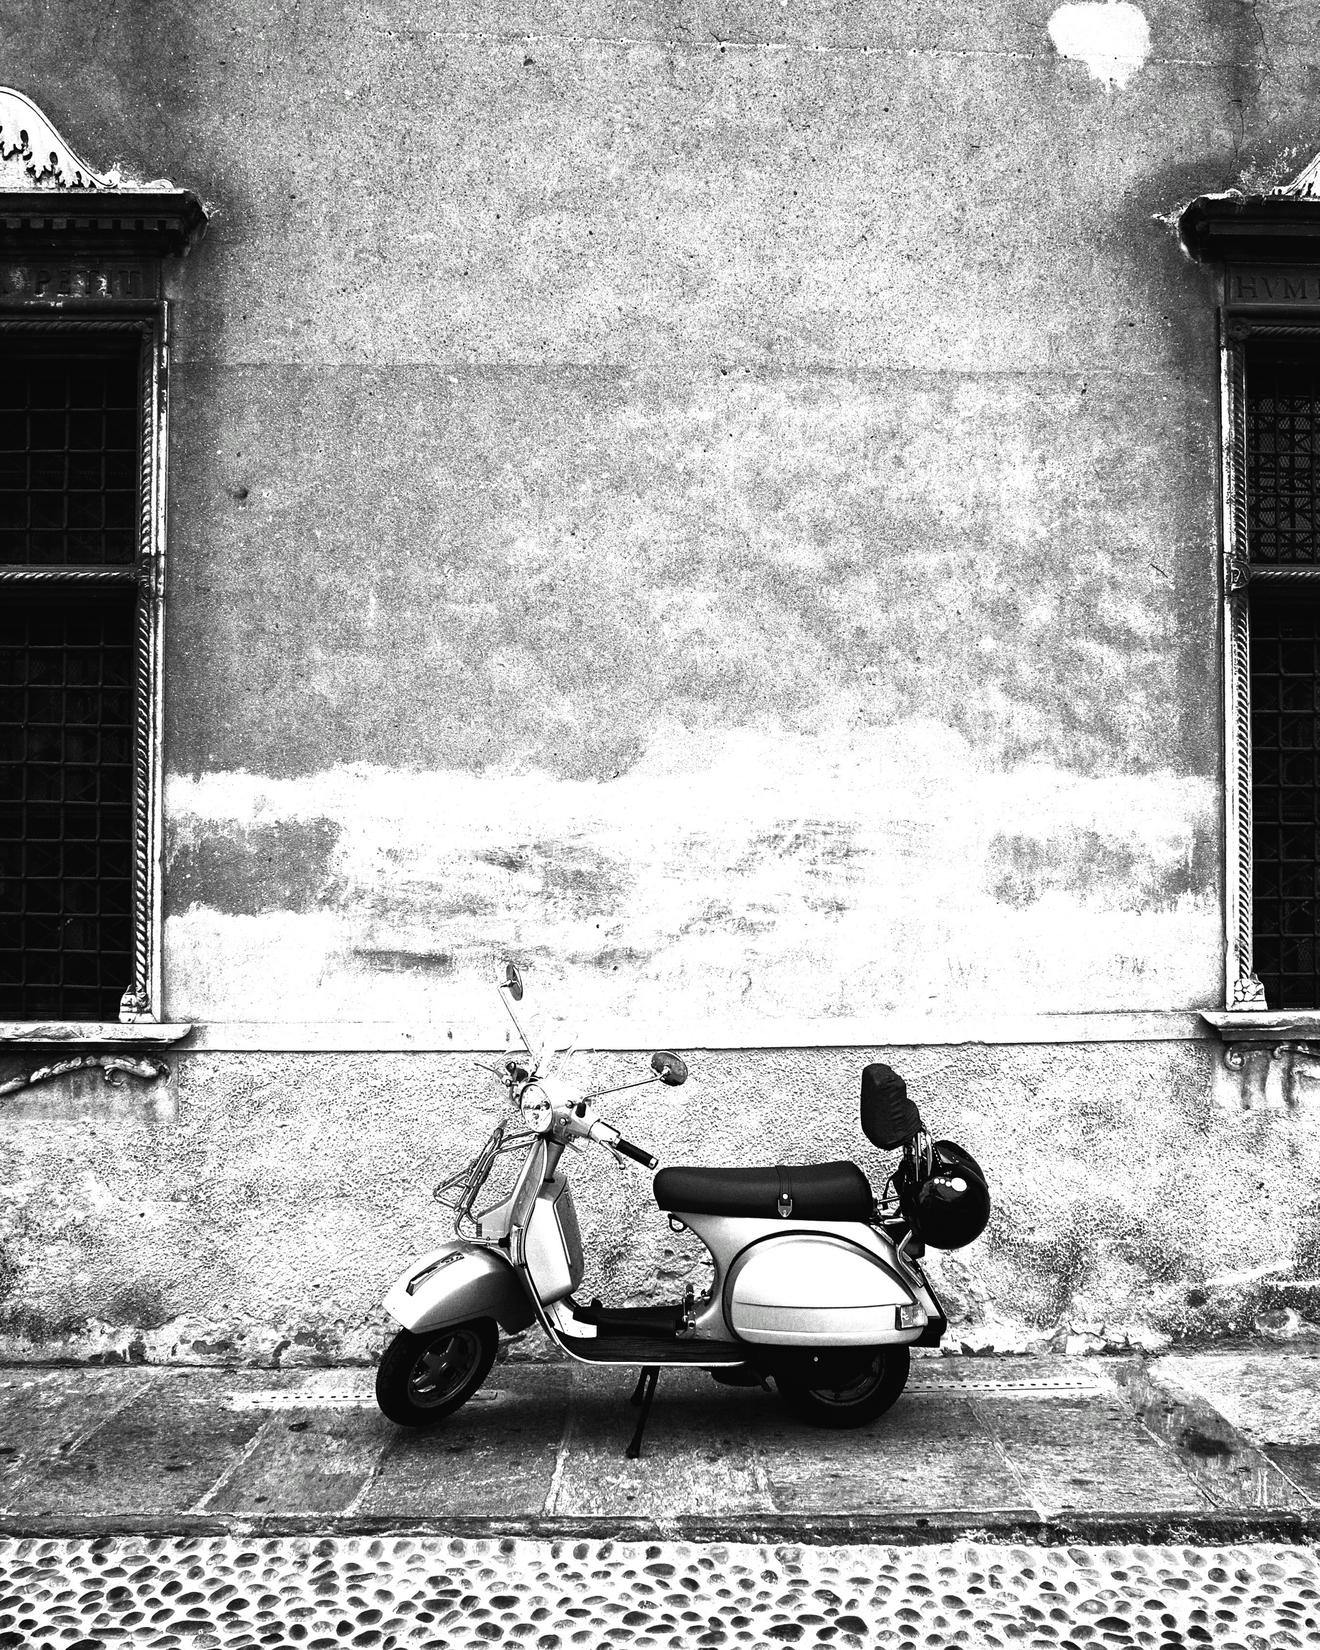 Black and white image of a Vespa scooter against a wall with ornate windows in Italy